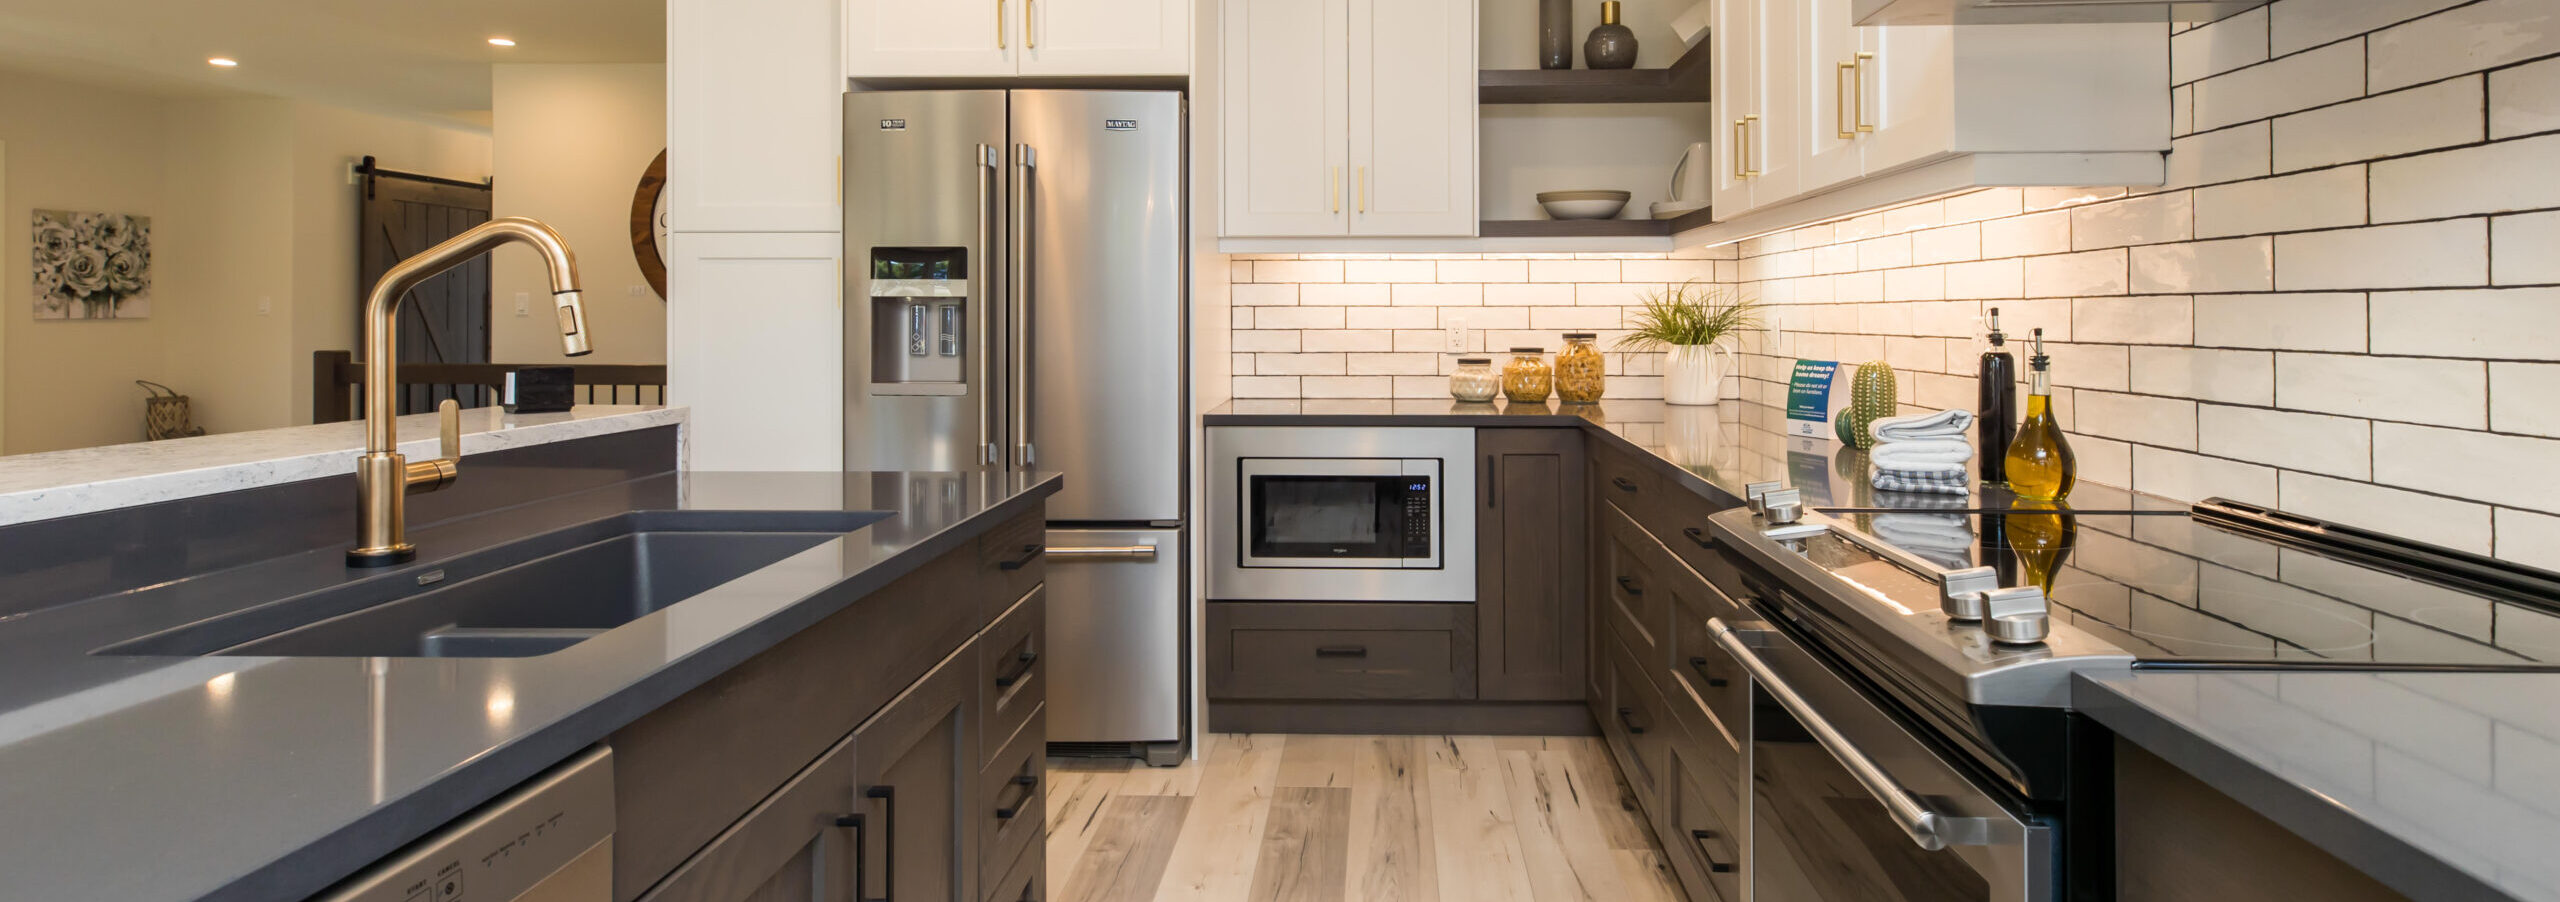 Modern kitchen with dark grey countertop and brushed faucet. White upper cabinets and dark grey lower cabinets with gold and black handles. Design by Sarnia Cabinets.